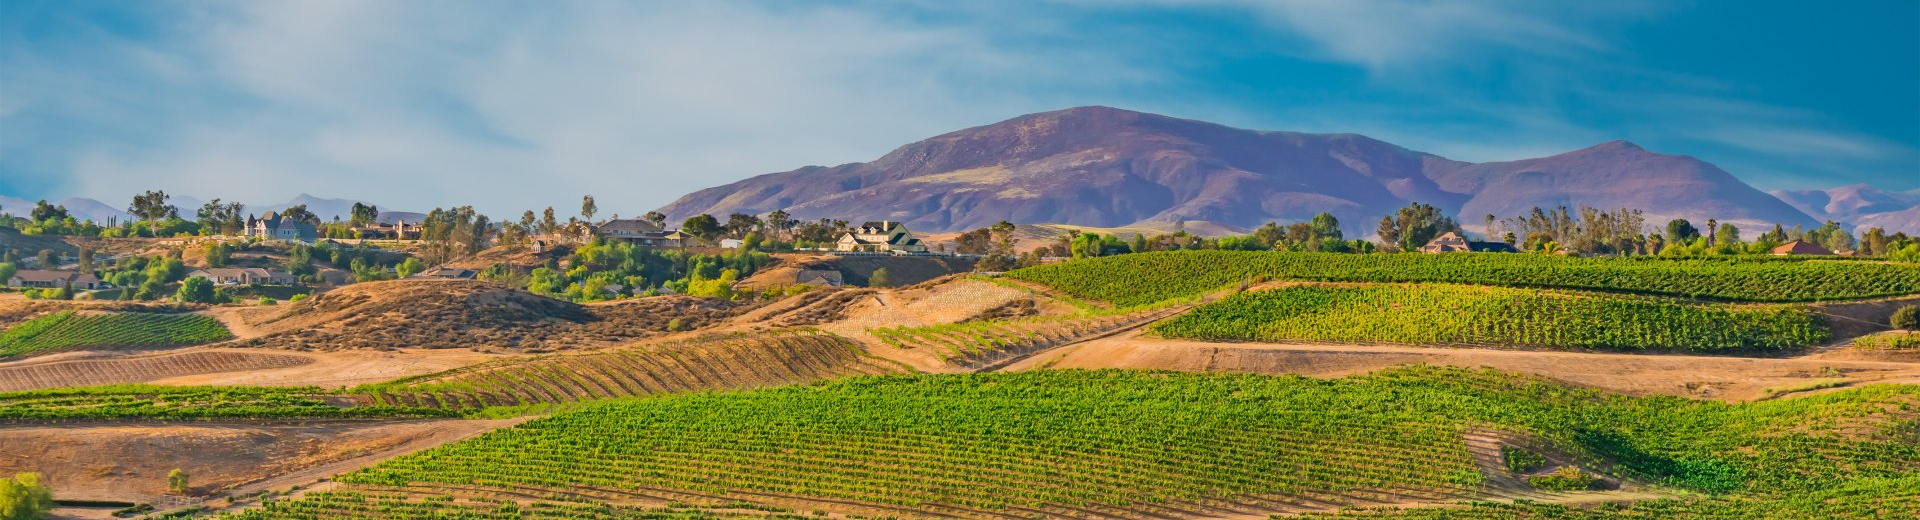 limo winery tours in temecula